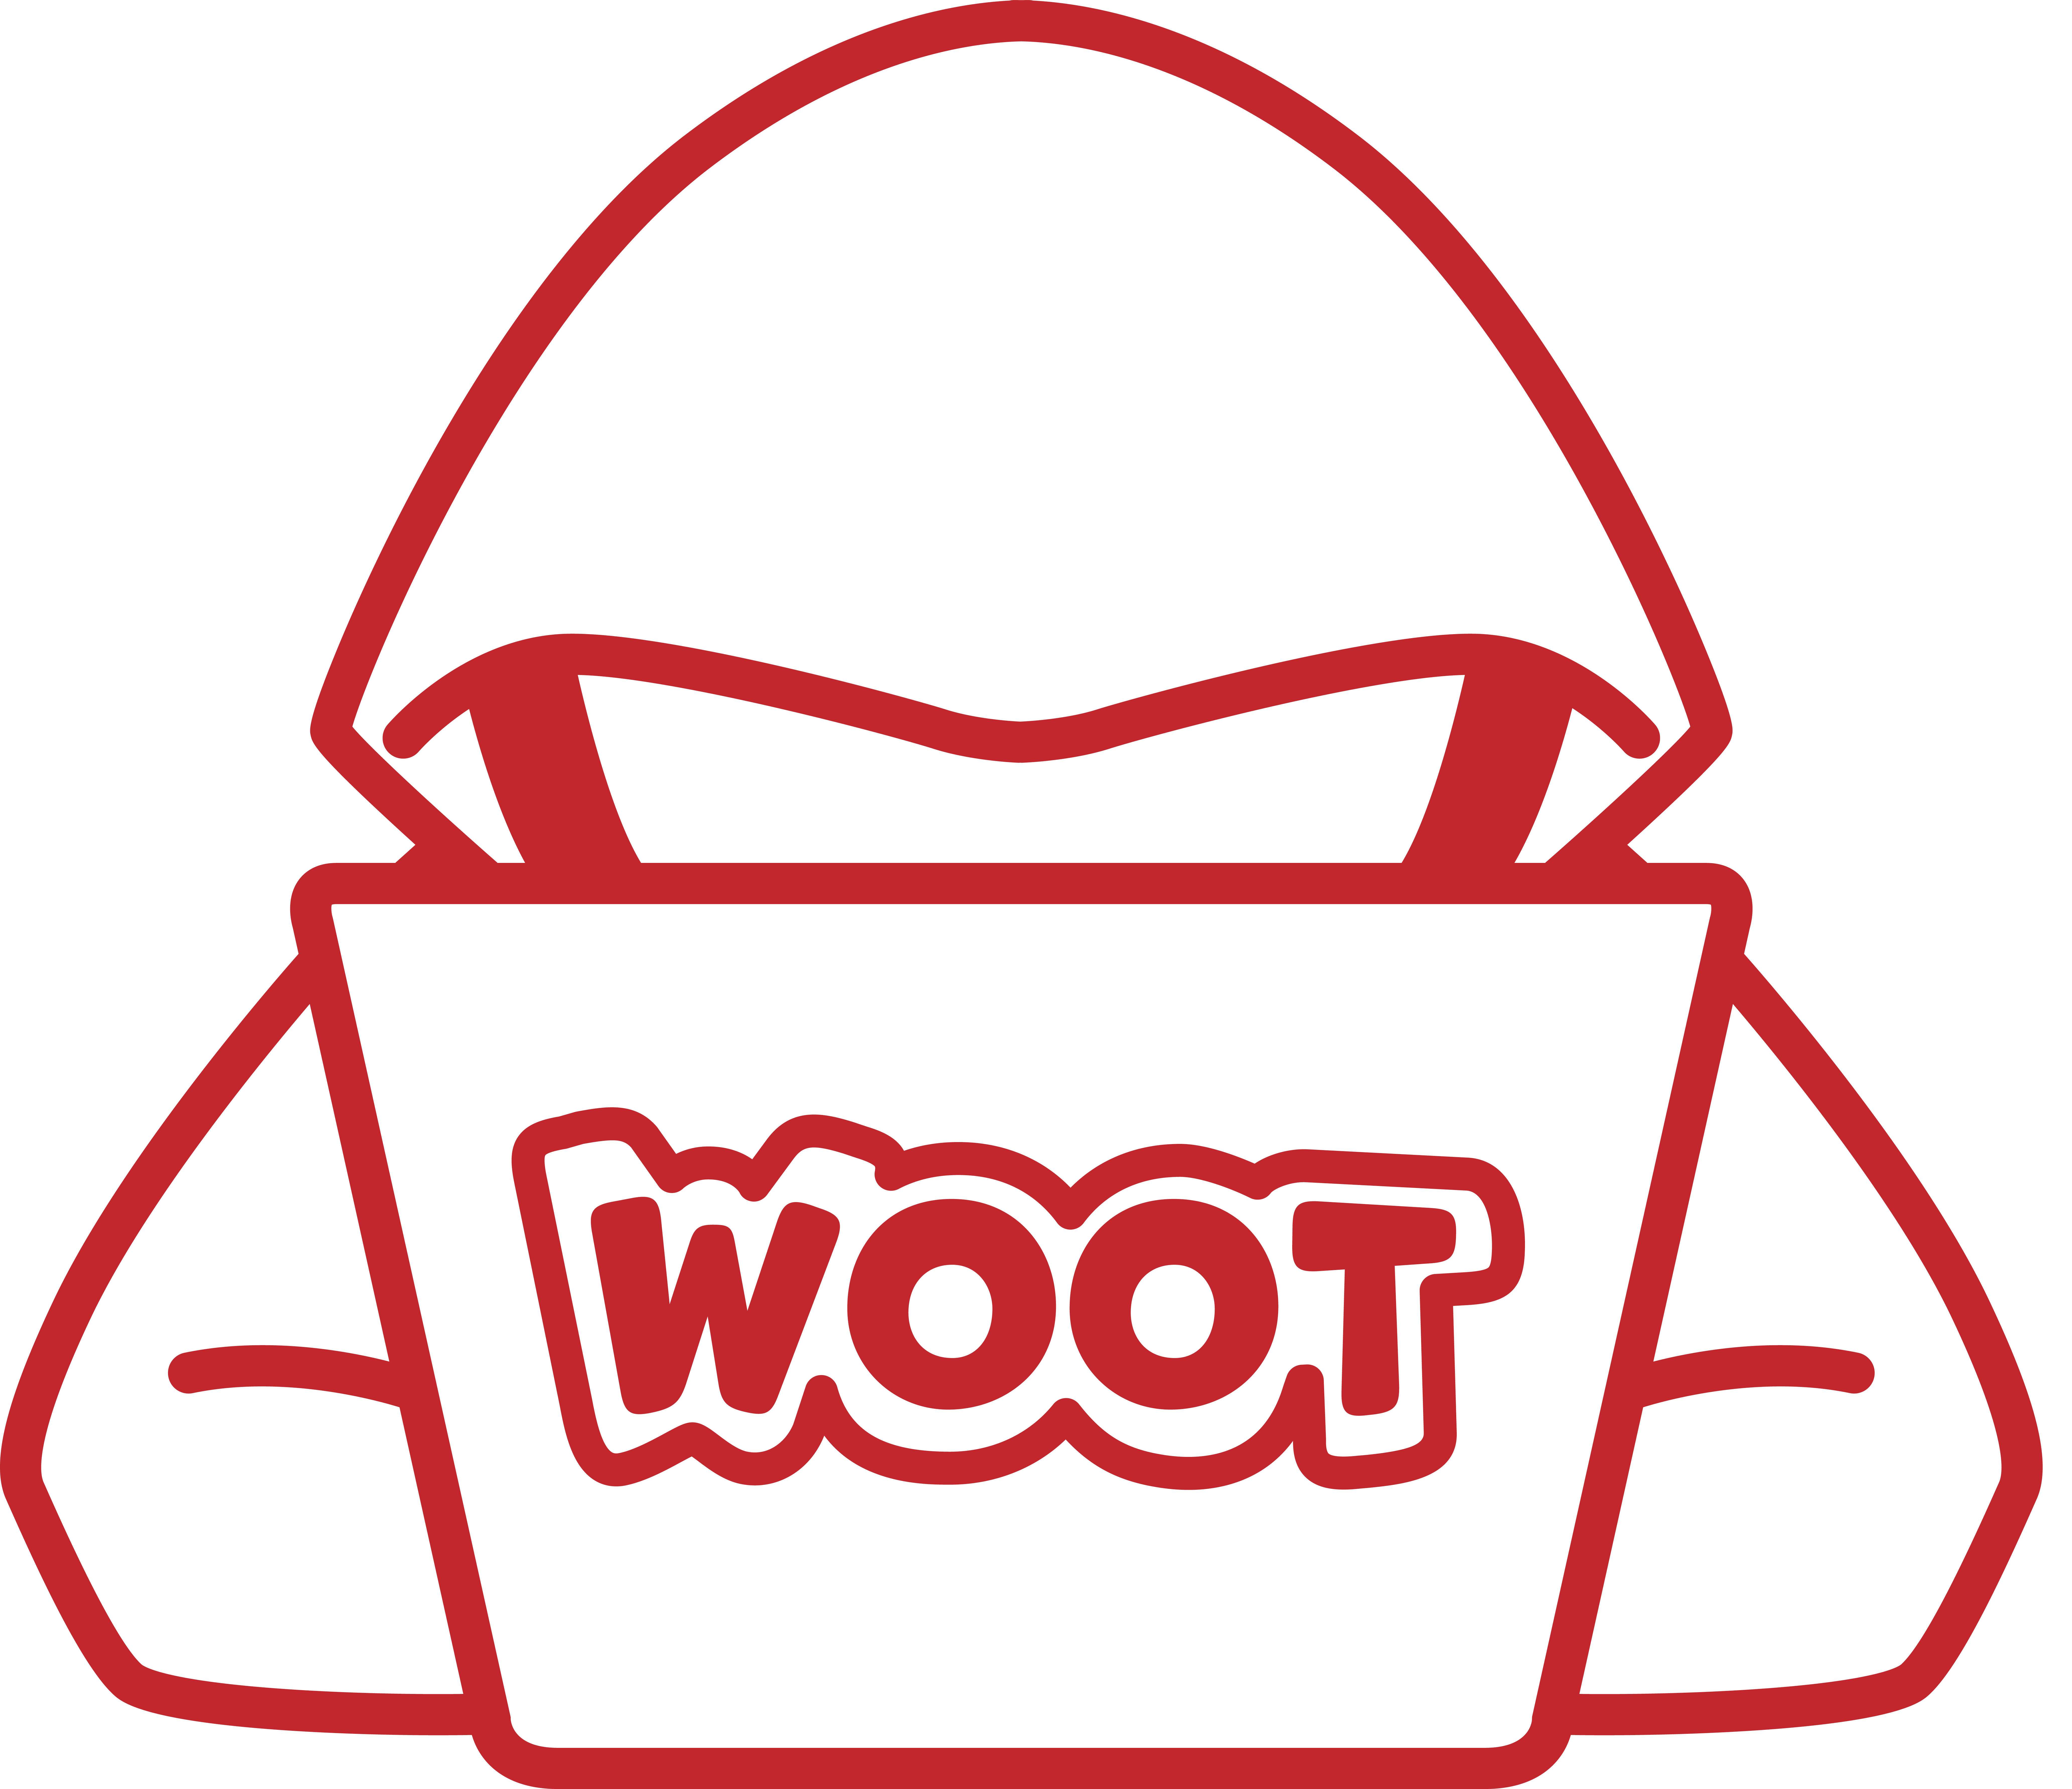 https://www.ieee-security.org/TC/SP2021/SPW2021/WOOT21/woot-logo.png